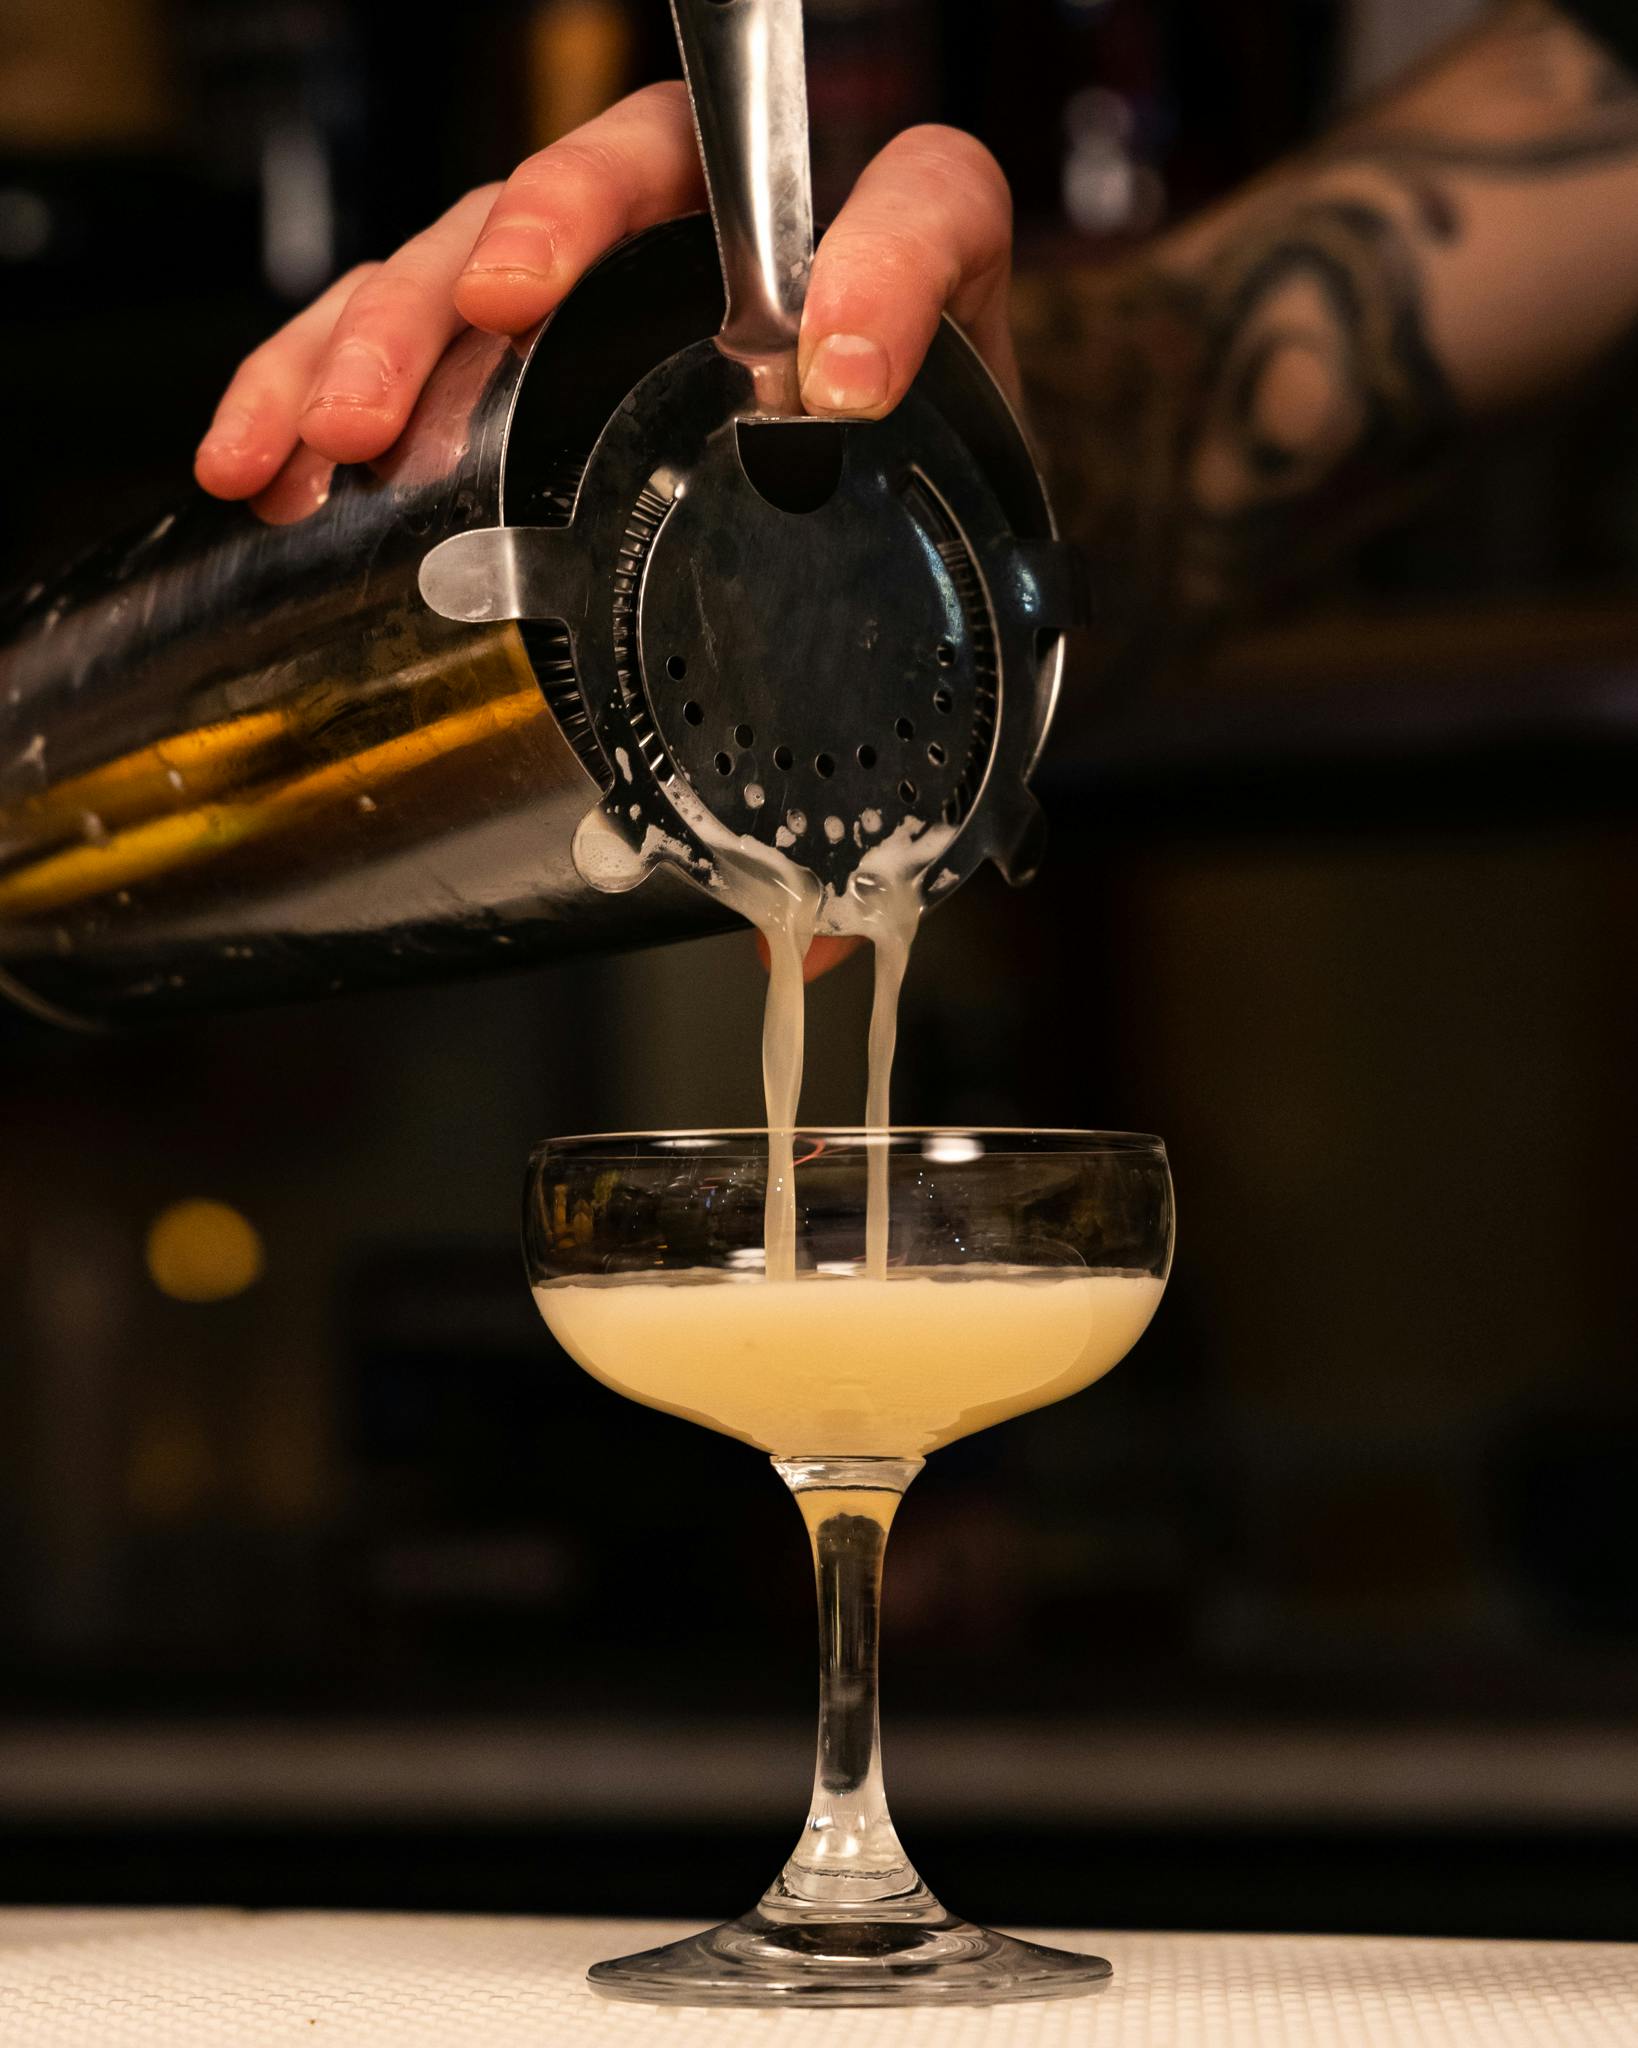 The Madagascar Sour being poured into a coupe glass